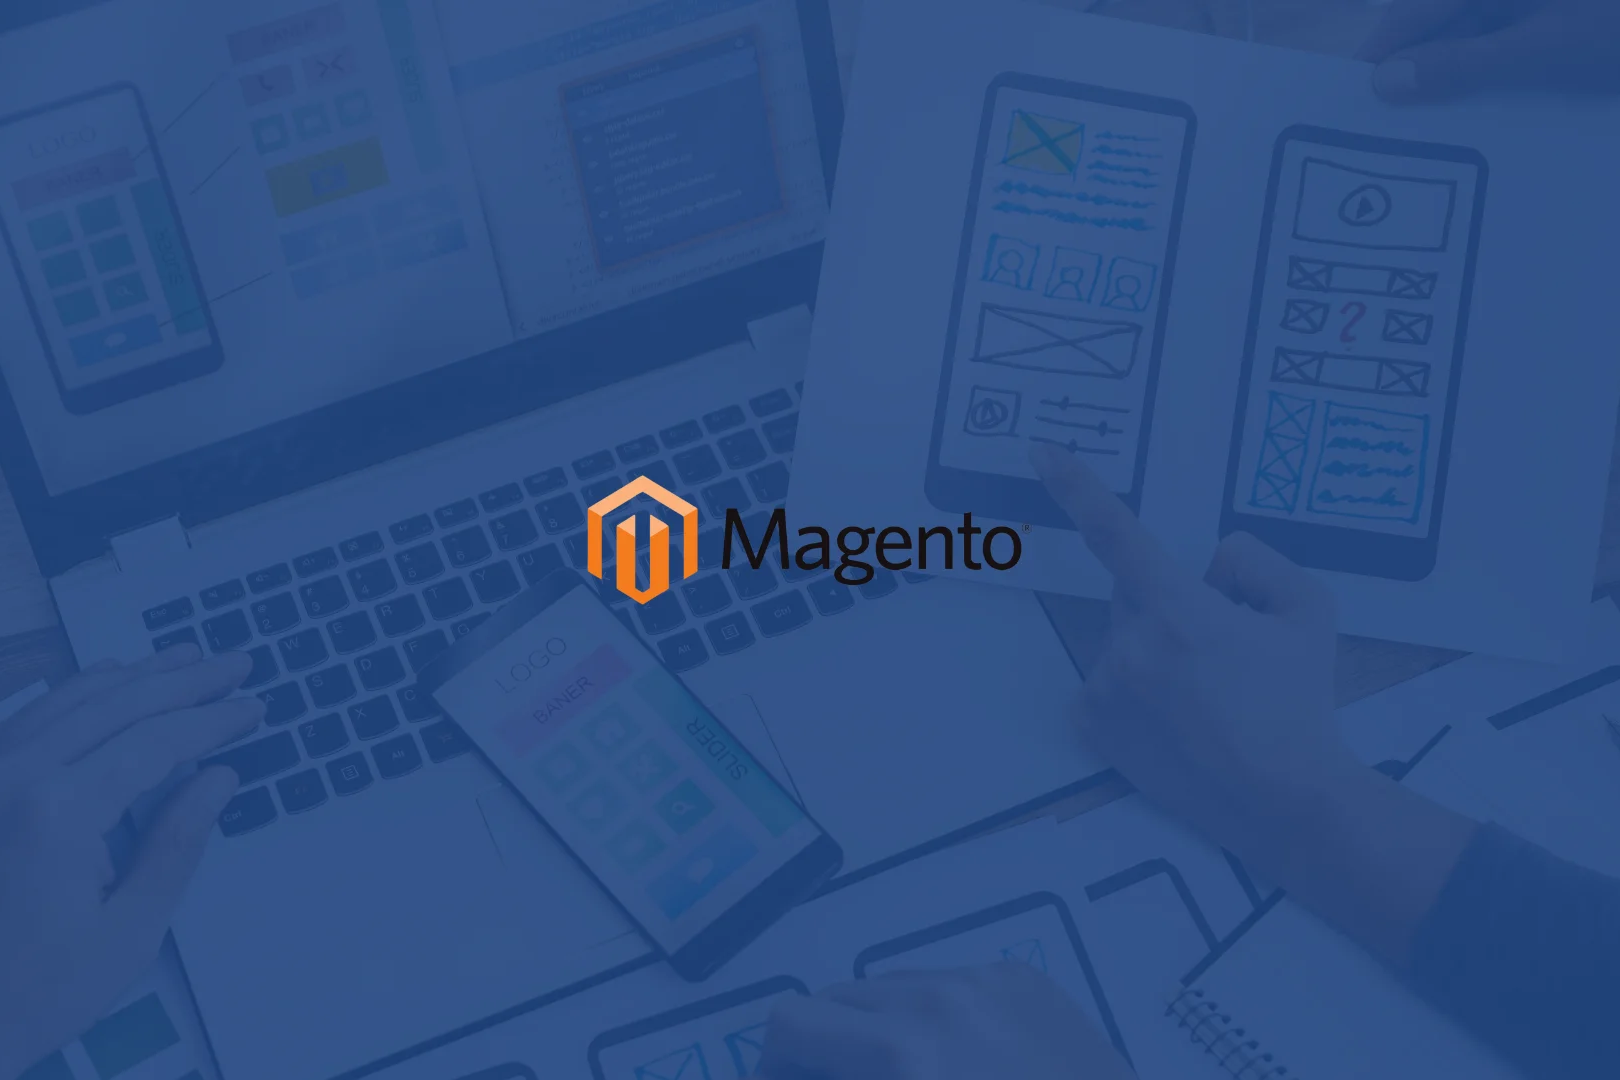 Redesigned with Magento